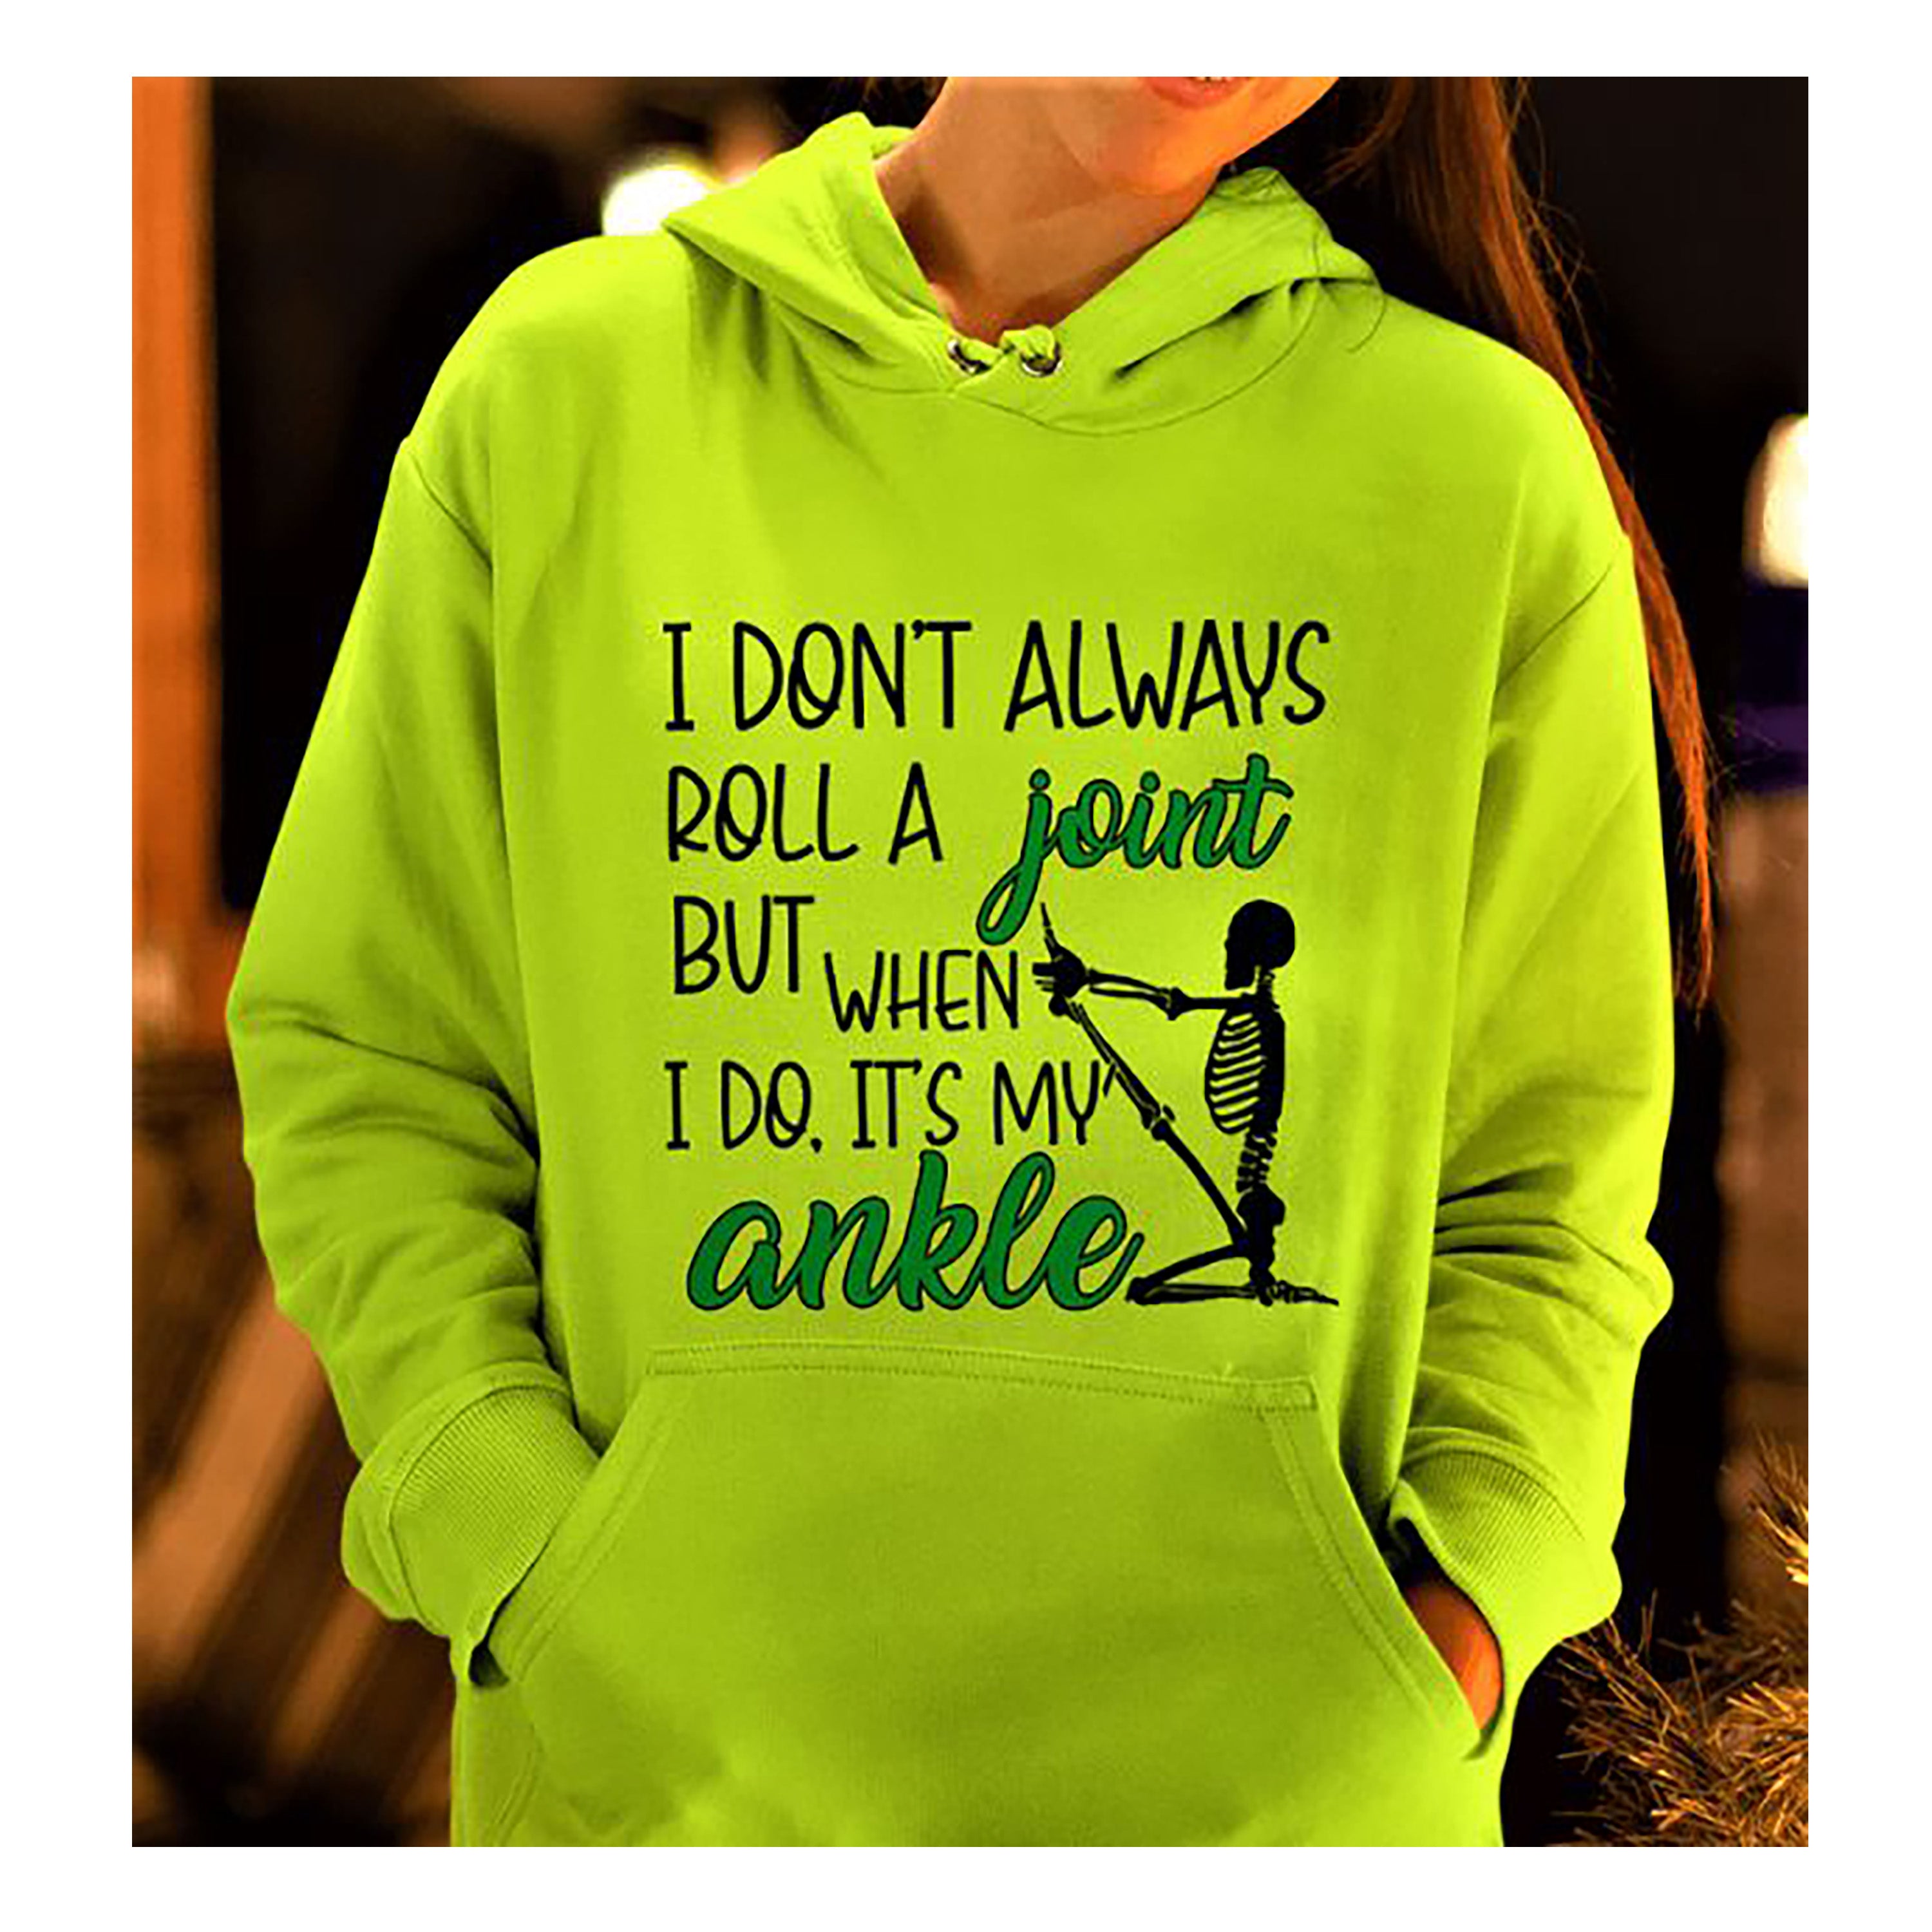 "I DON'T ALWAYS ROLL A JOINT"- Hoodie & Sweatshirt.